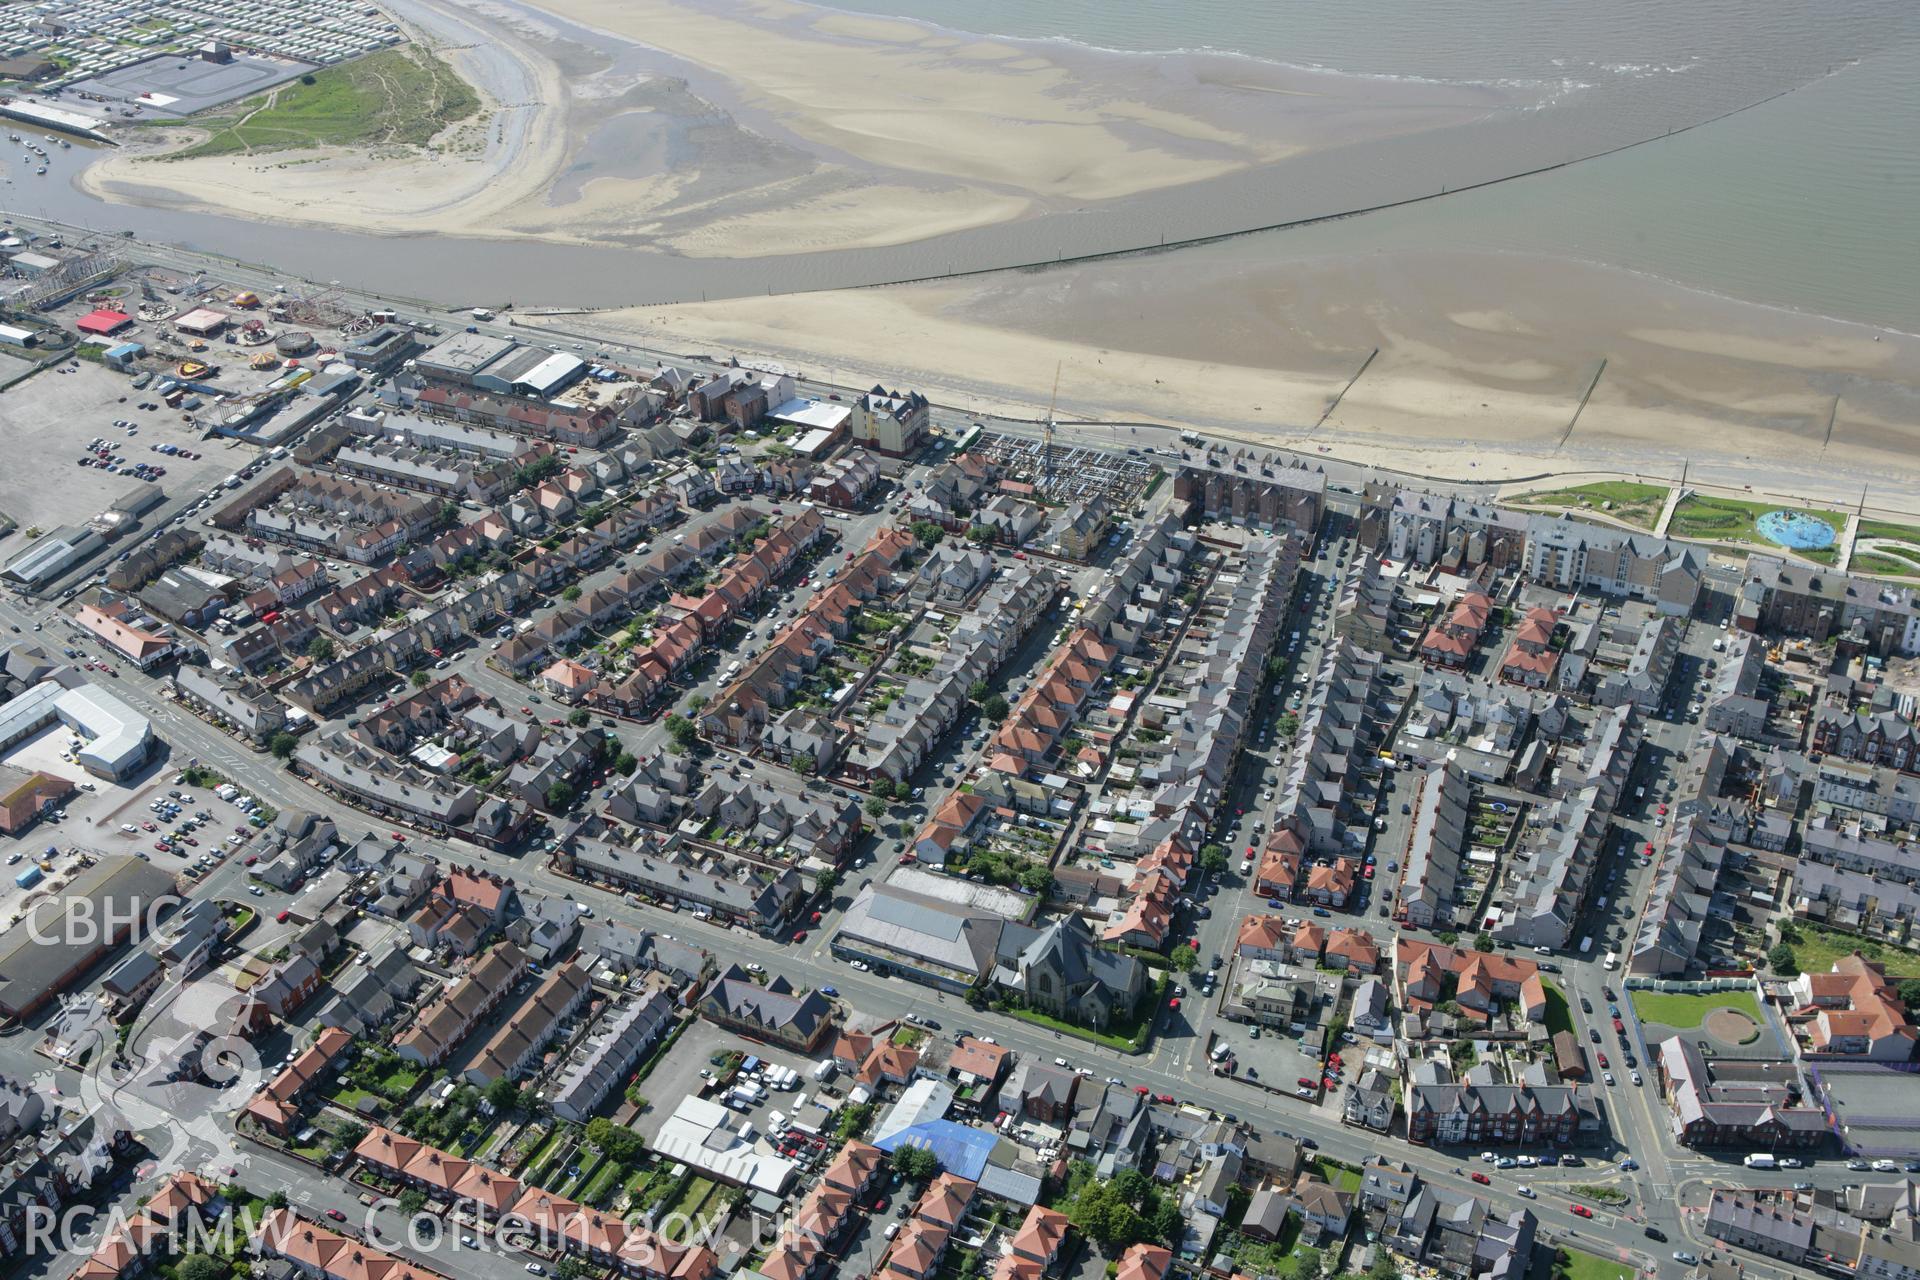 RCAHMW colour oblique aerial photograph of Rhyl. Taken on 31 July 2007 by Toby Driver